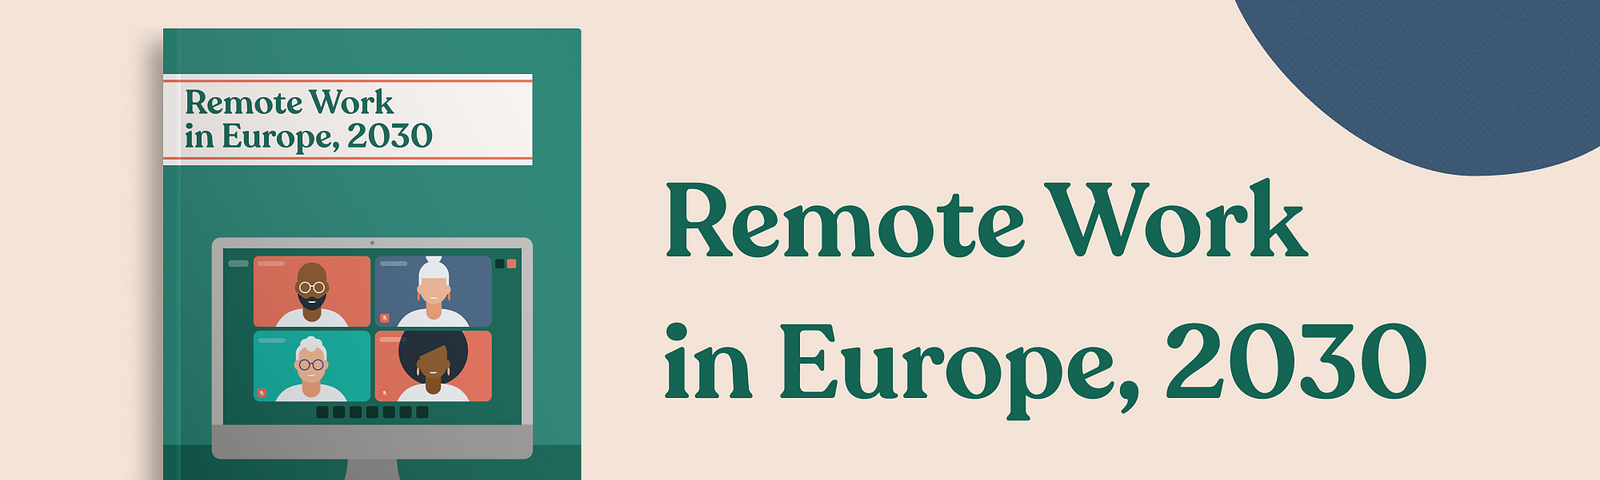 “Remote Work in Europe, 2030” book with 4 people in a video conference on the cover over peach background w title again.